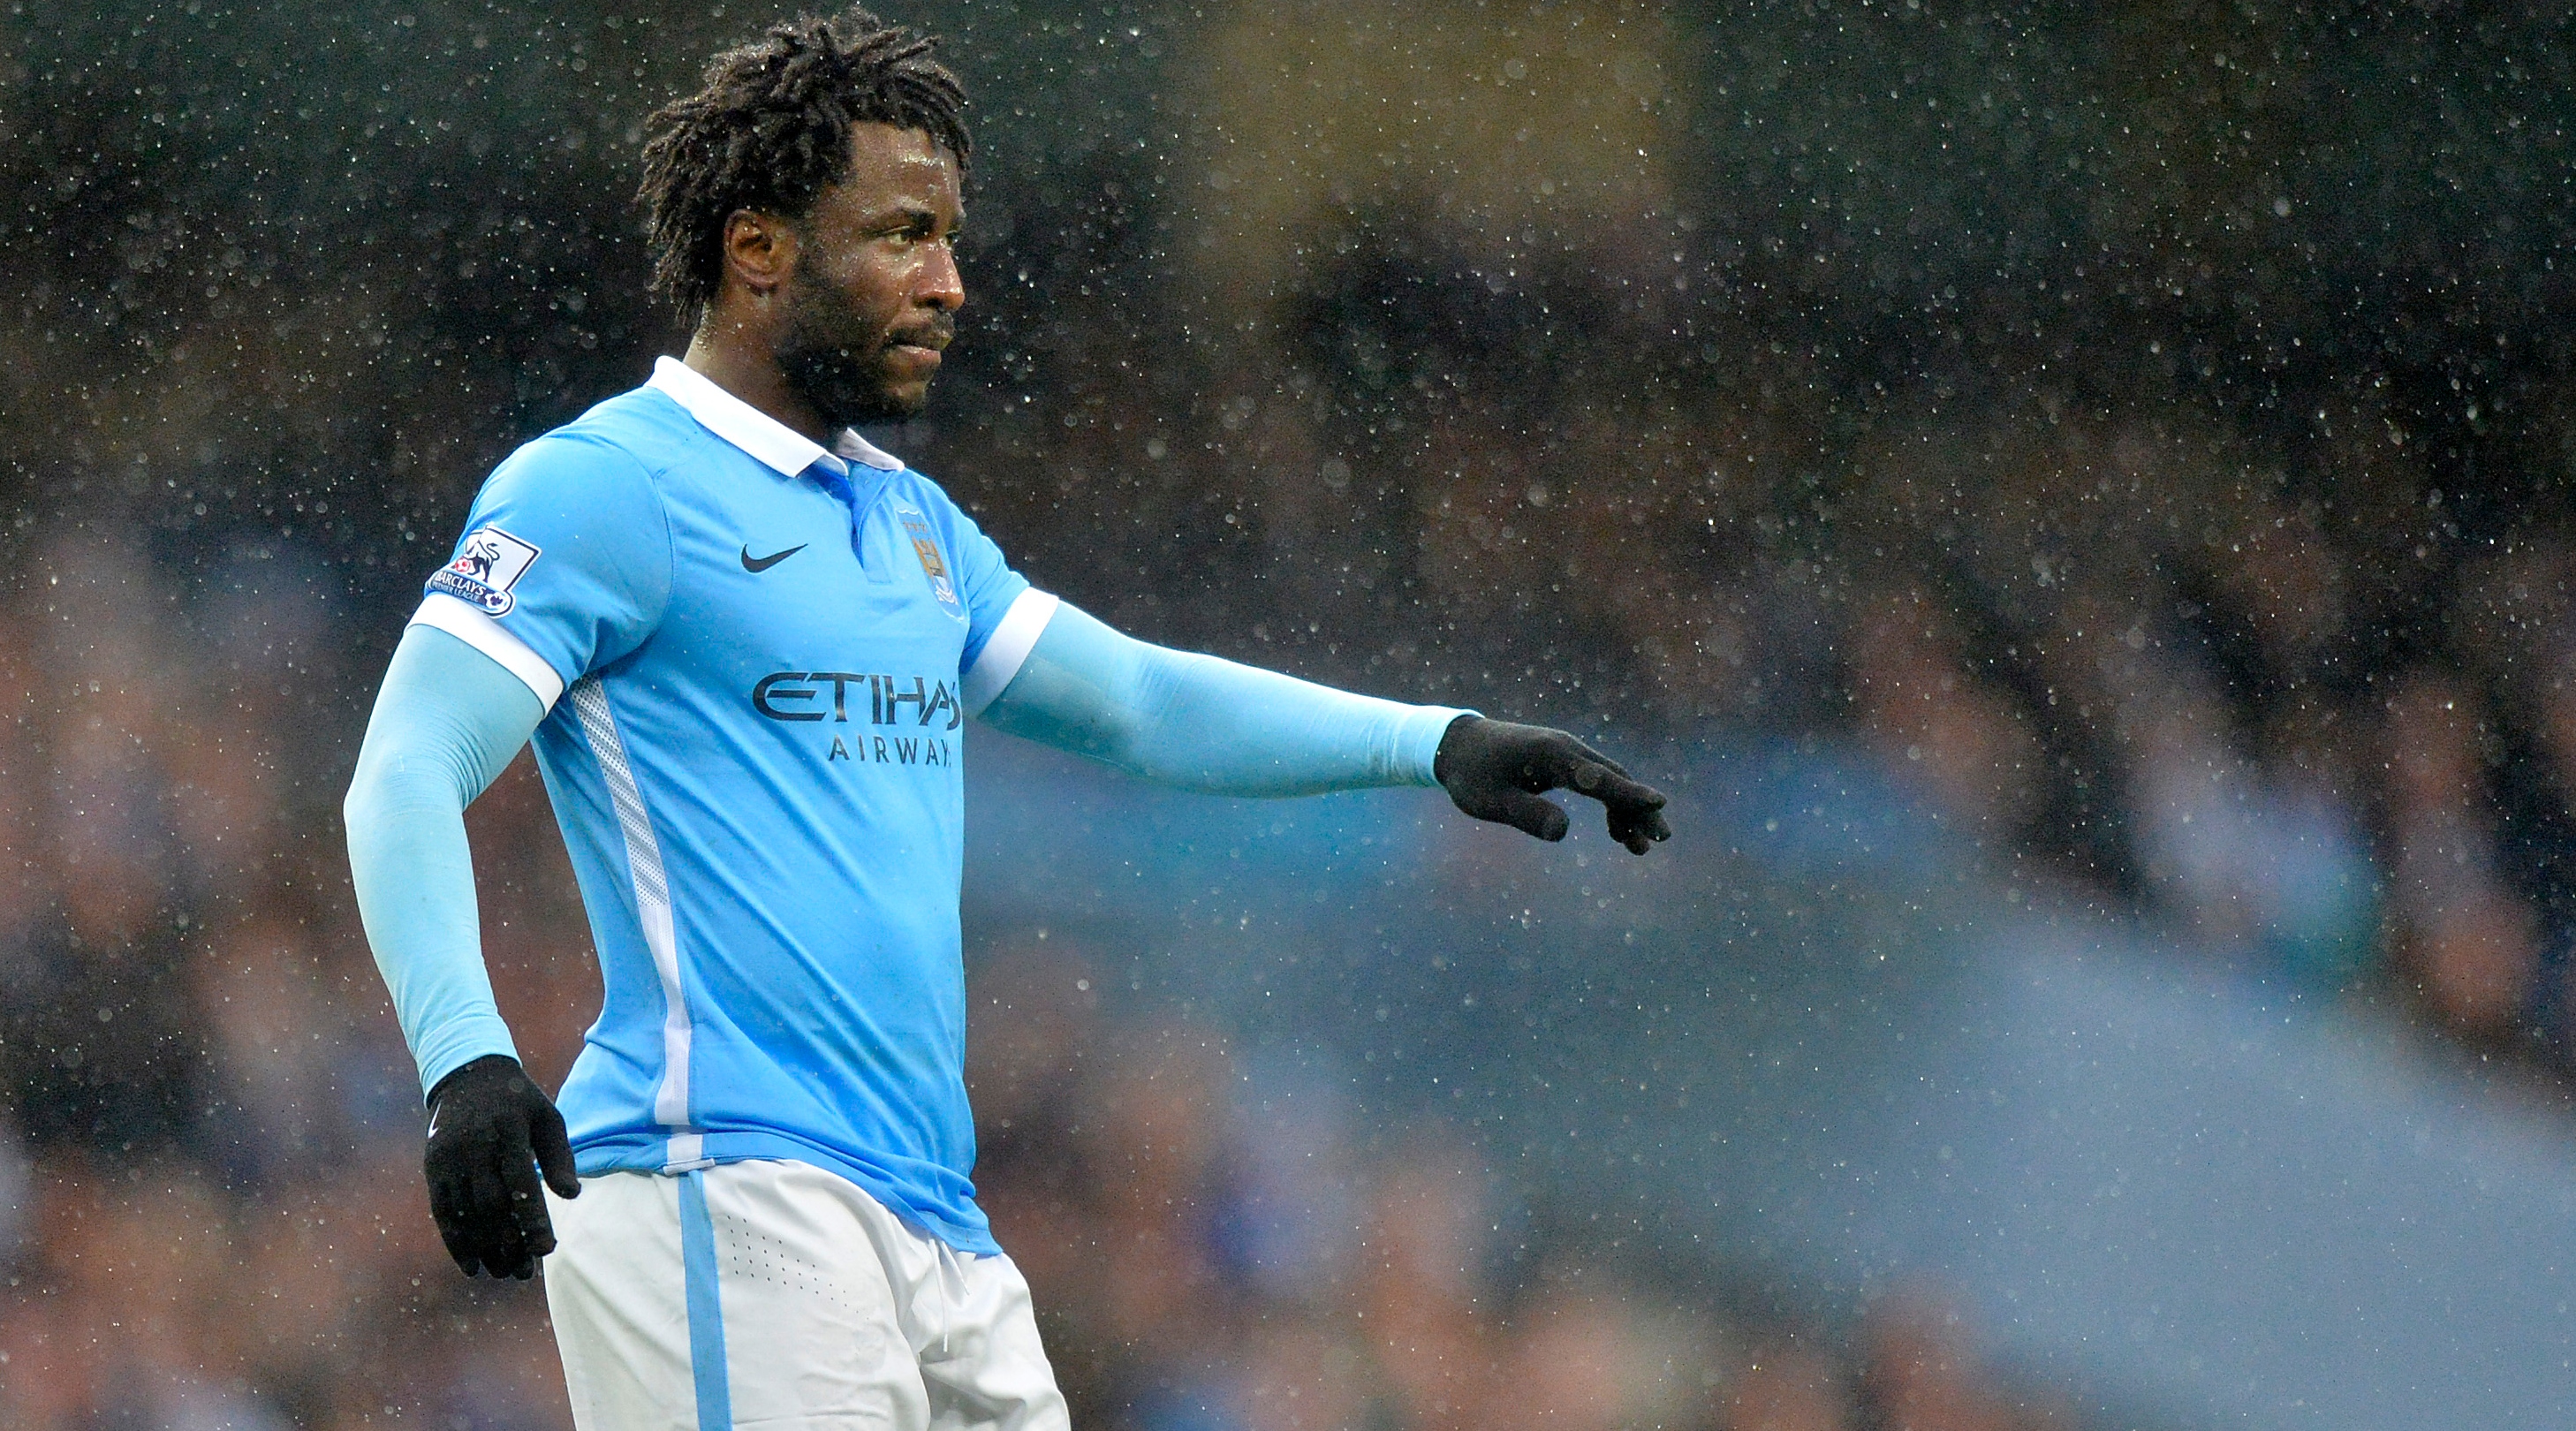 MANCHESTER, ENGLAND - APRIL 09: Wilfried Bony of Manchester City gestures during the Barclays Premier League match between Manchester City and West Bromwich Albion at Etihad Stadium on April 9, 2016 in Manchester, England (Photo by Adam Fradgley - AMA/West Bromwich Albion FC via Getty Images)